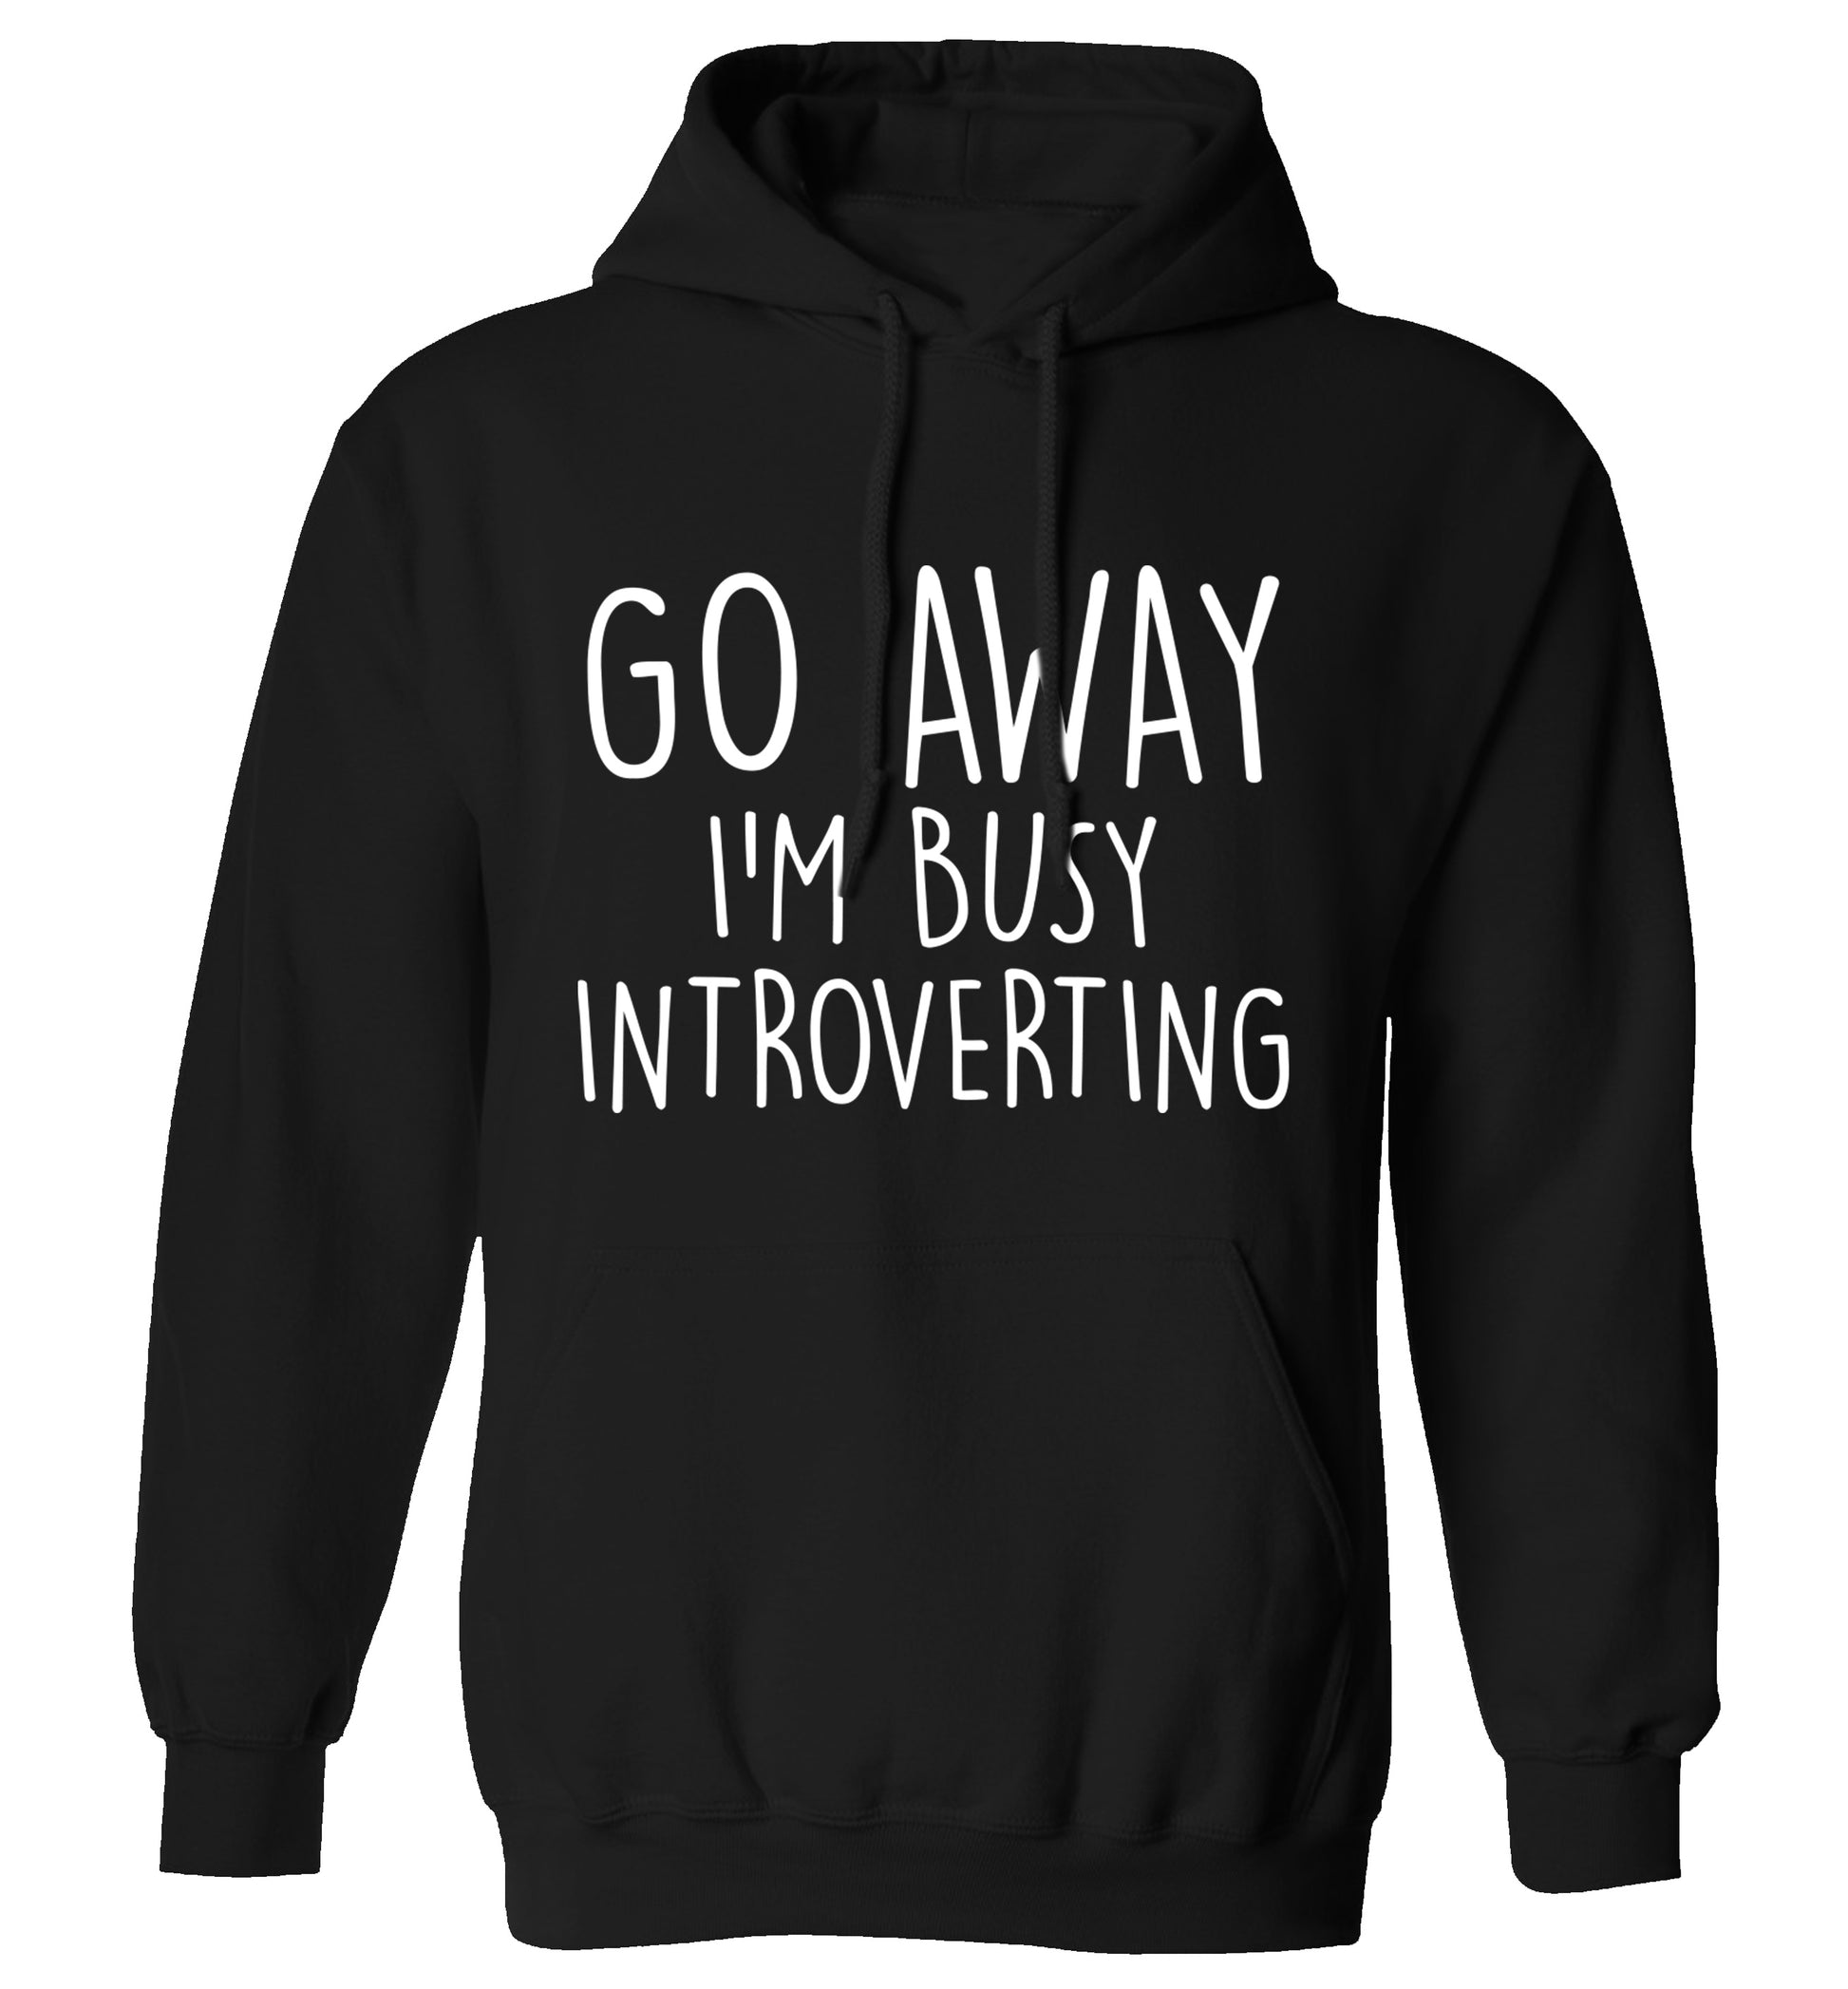 Go away I'm busy introverting adults unisex black hoodie 2XL